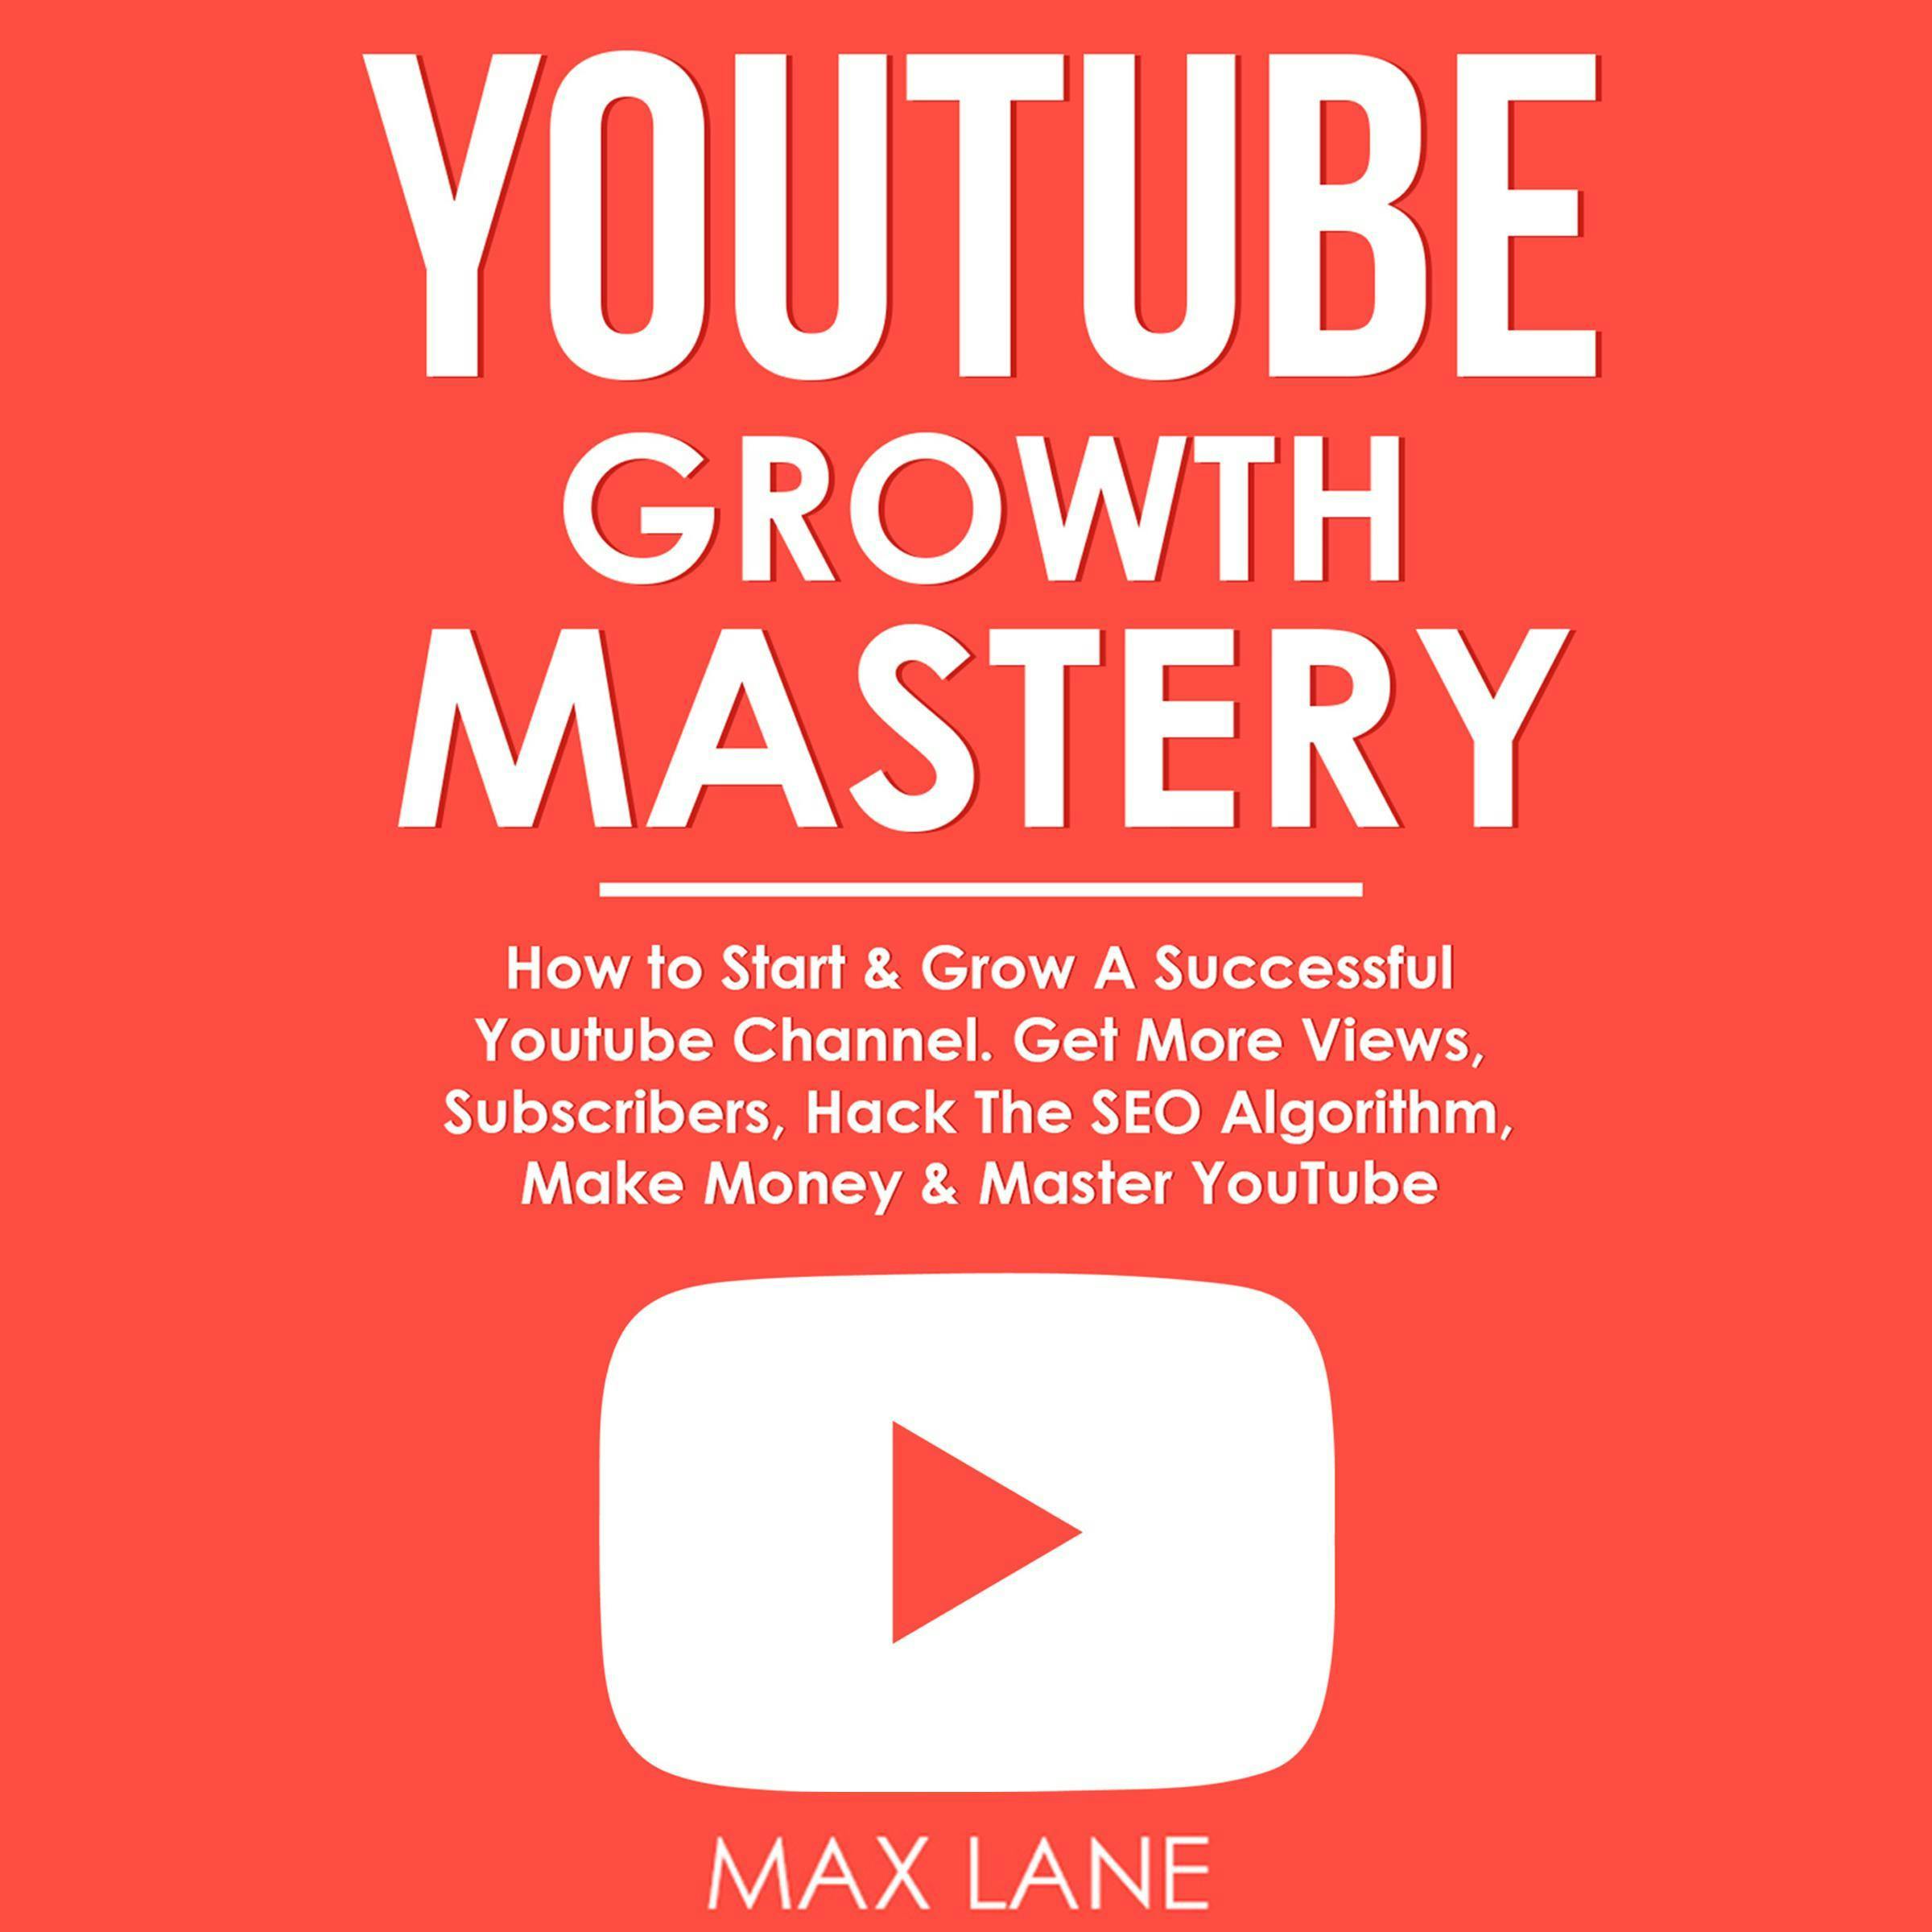 Growth Mastery: How To Start & Grow A Successful